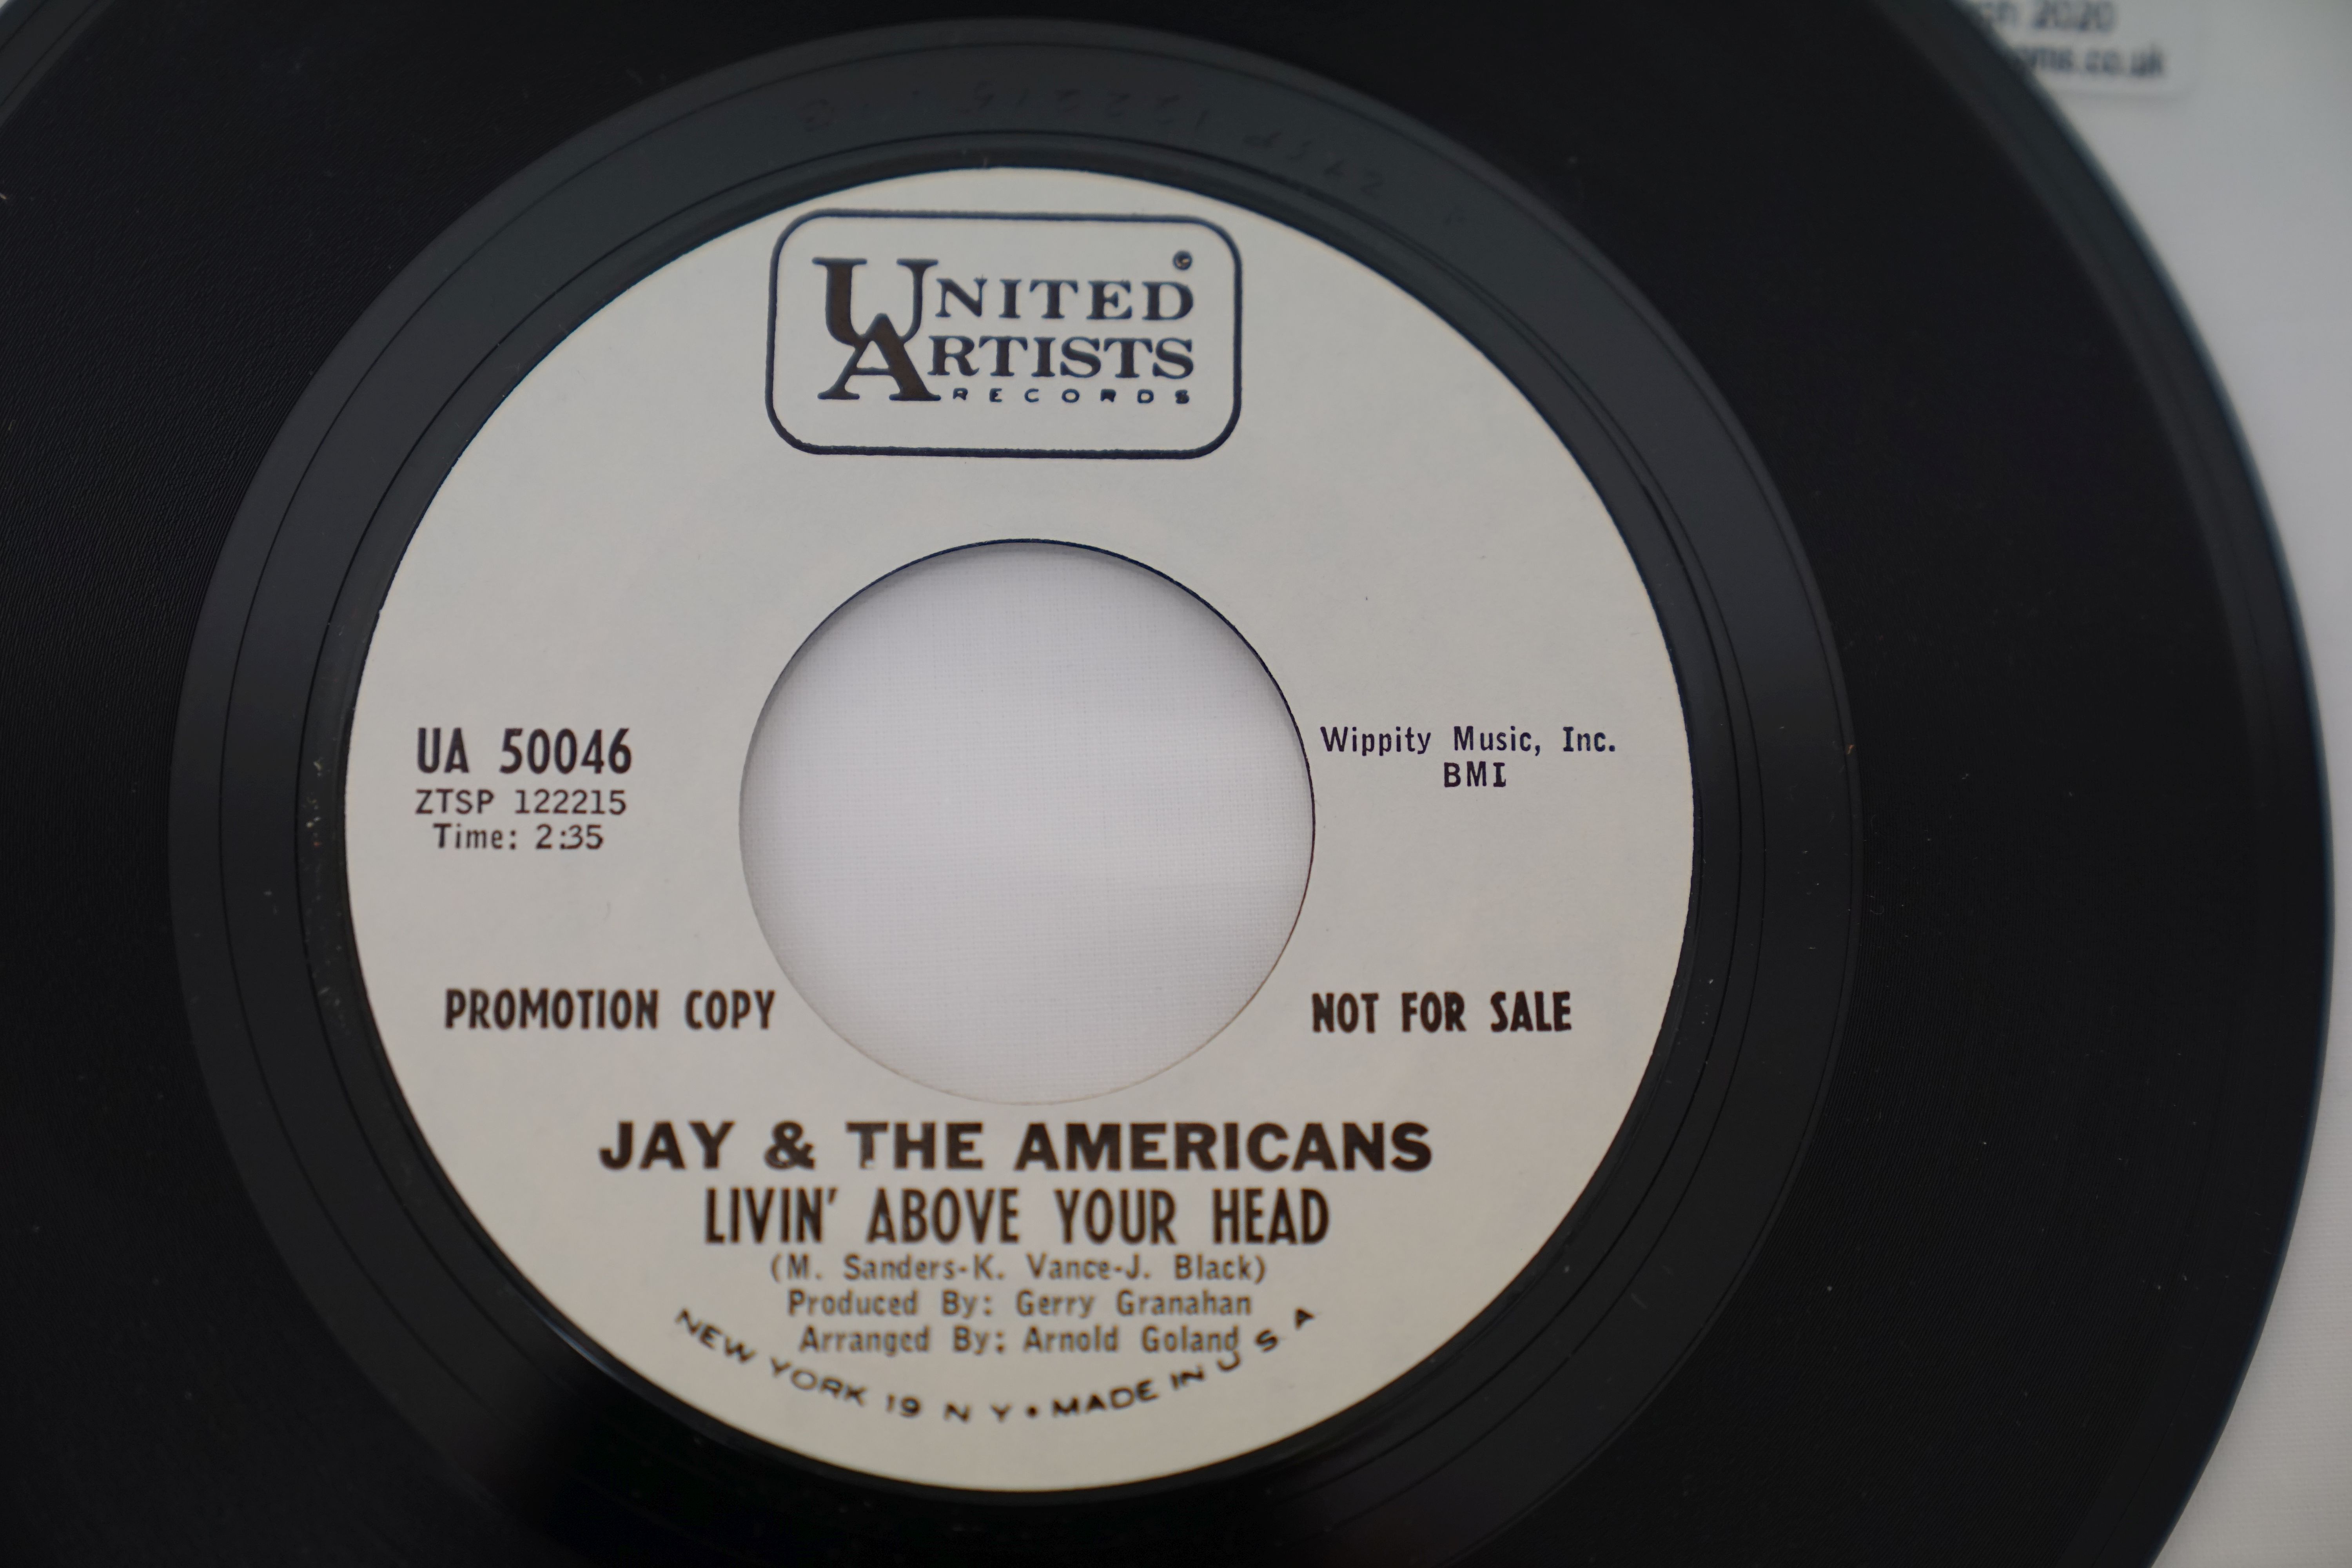 Vinyl - 5 rare original US 1st pressing Northern Soul Promo copies on United Artists Records. - Image 12 of 22